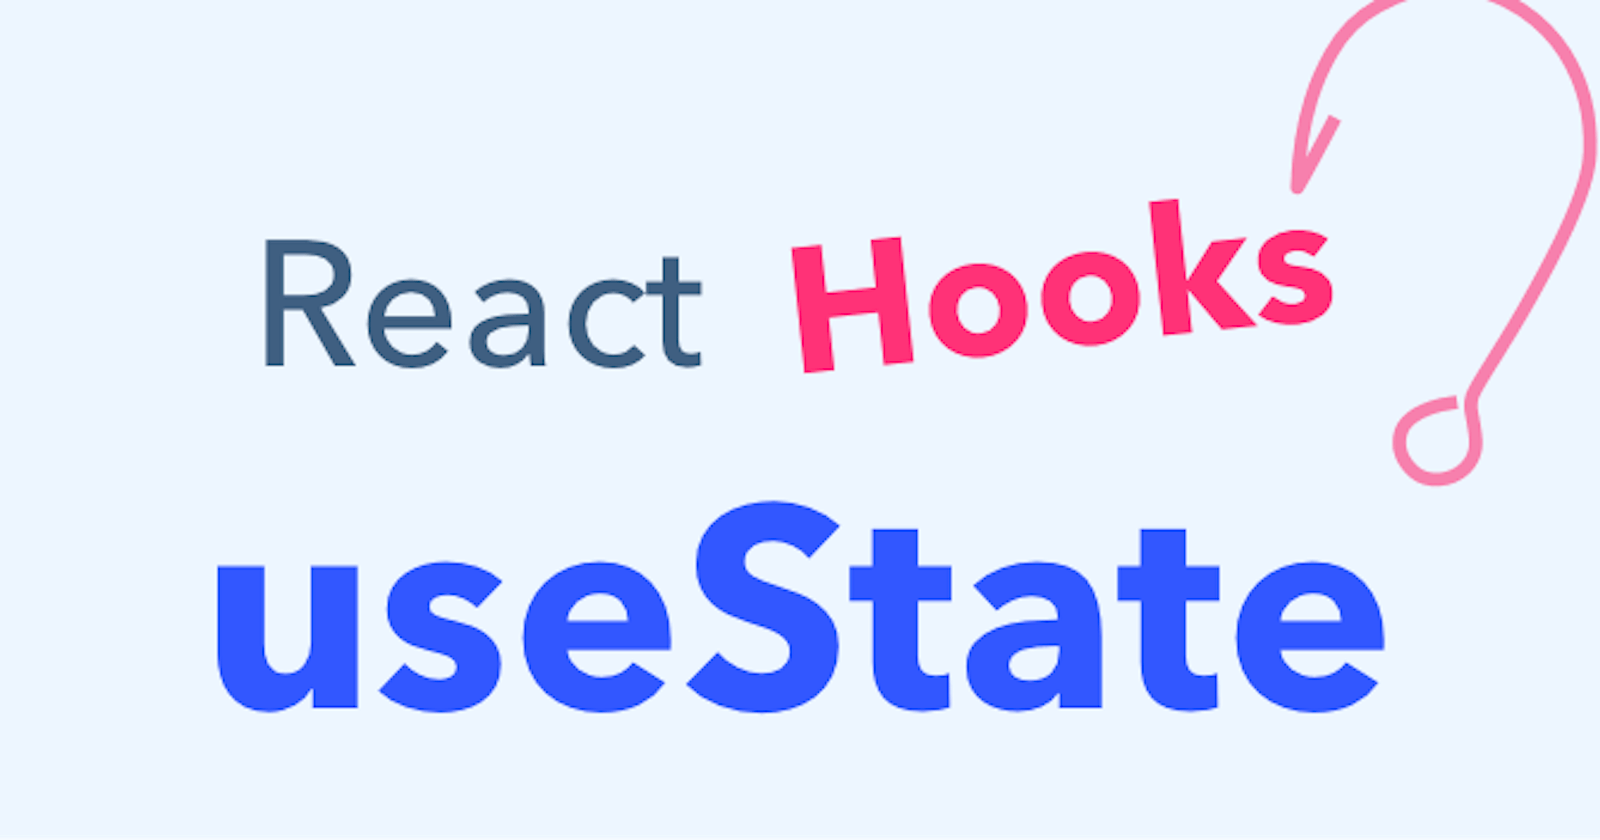 Using the useState() hook in react js